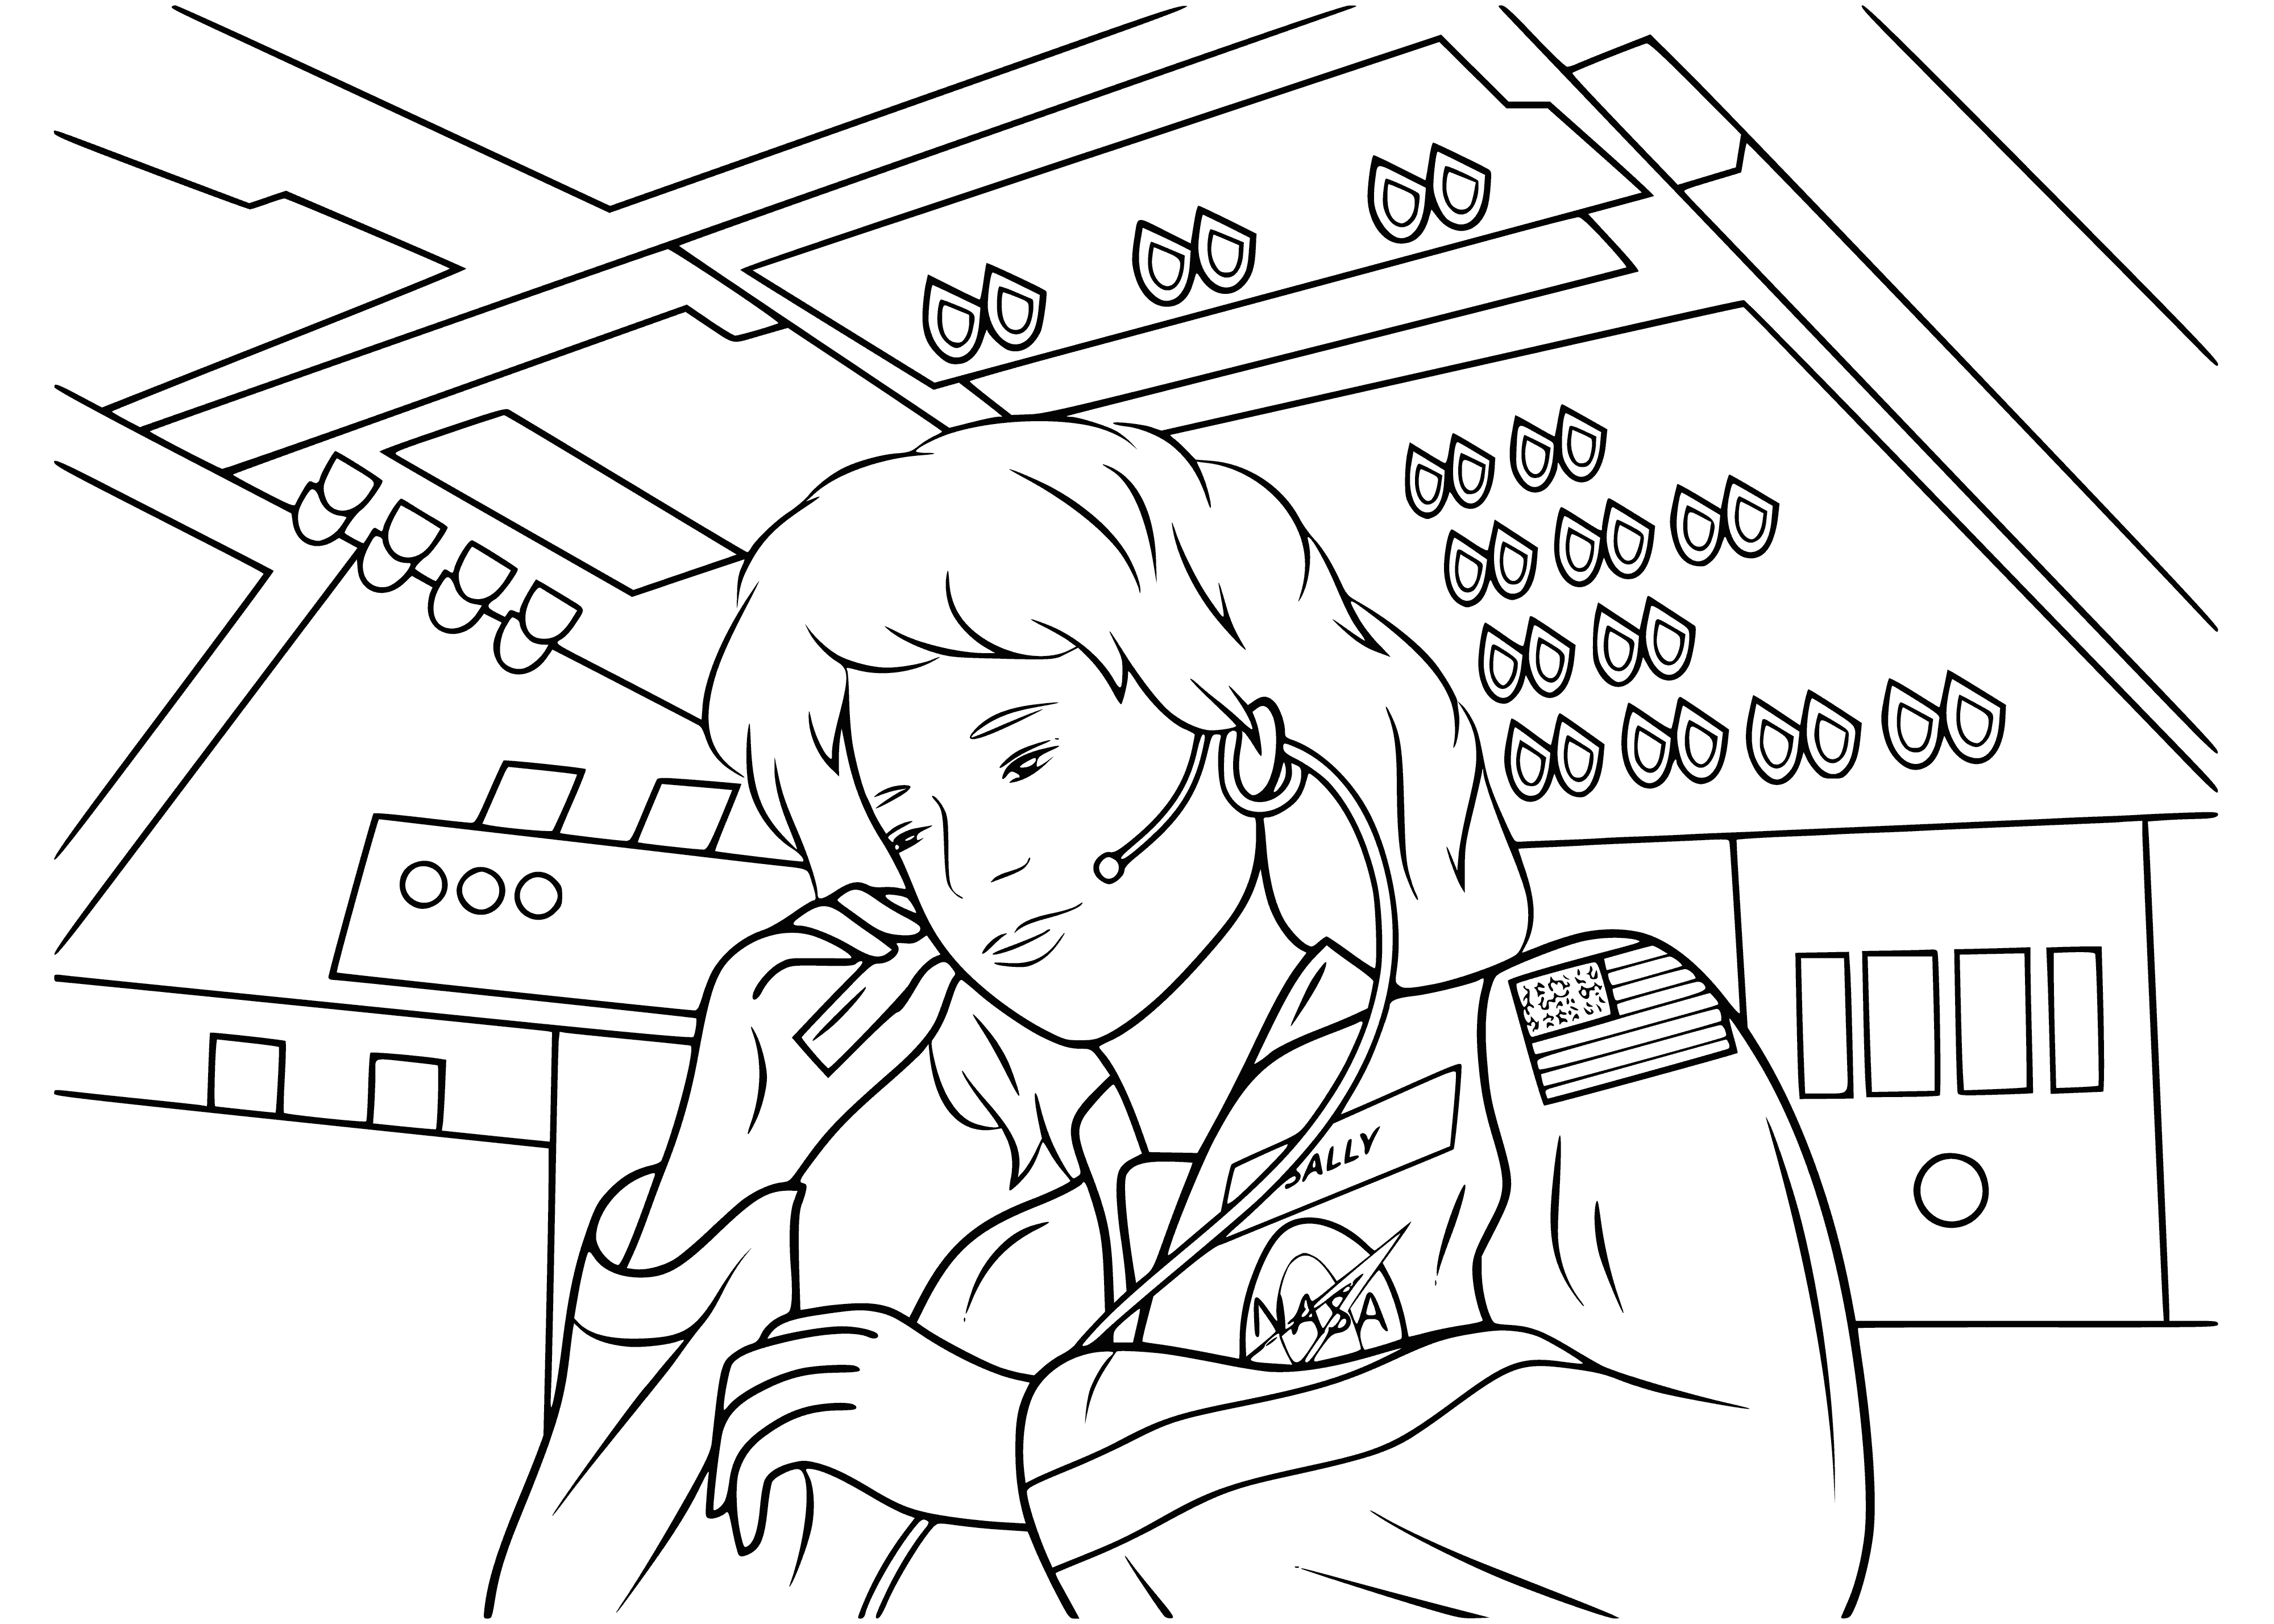 coloring page: Space shuttle orbiting planet w/ green atmosphere & long antenna.